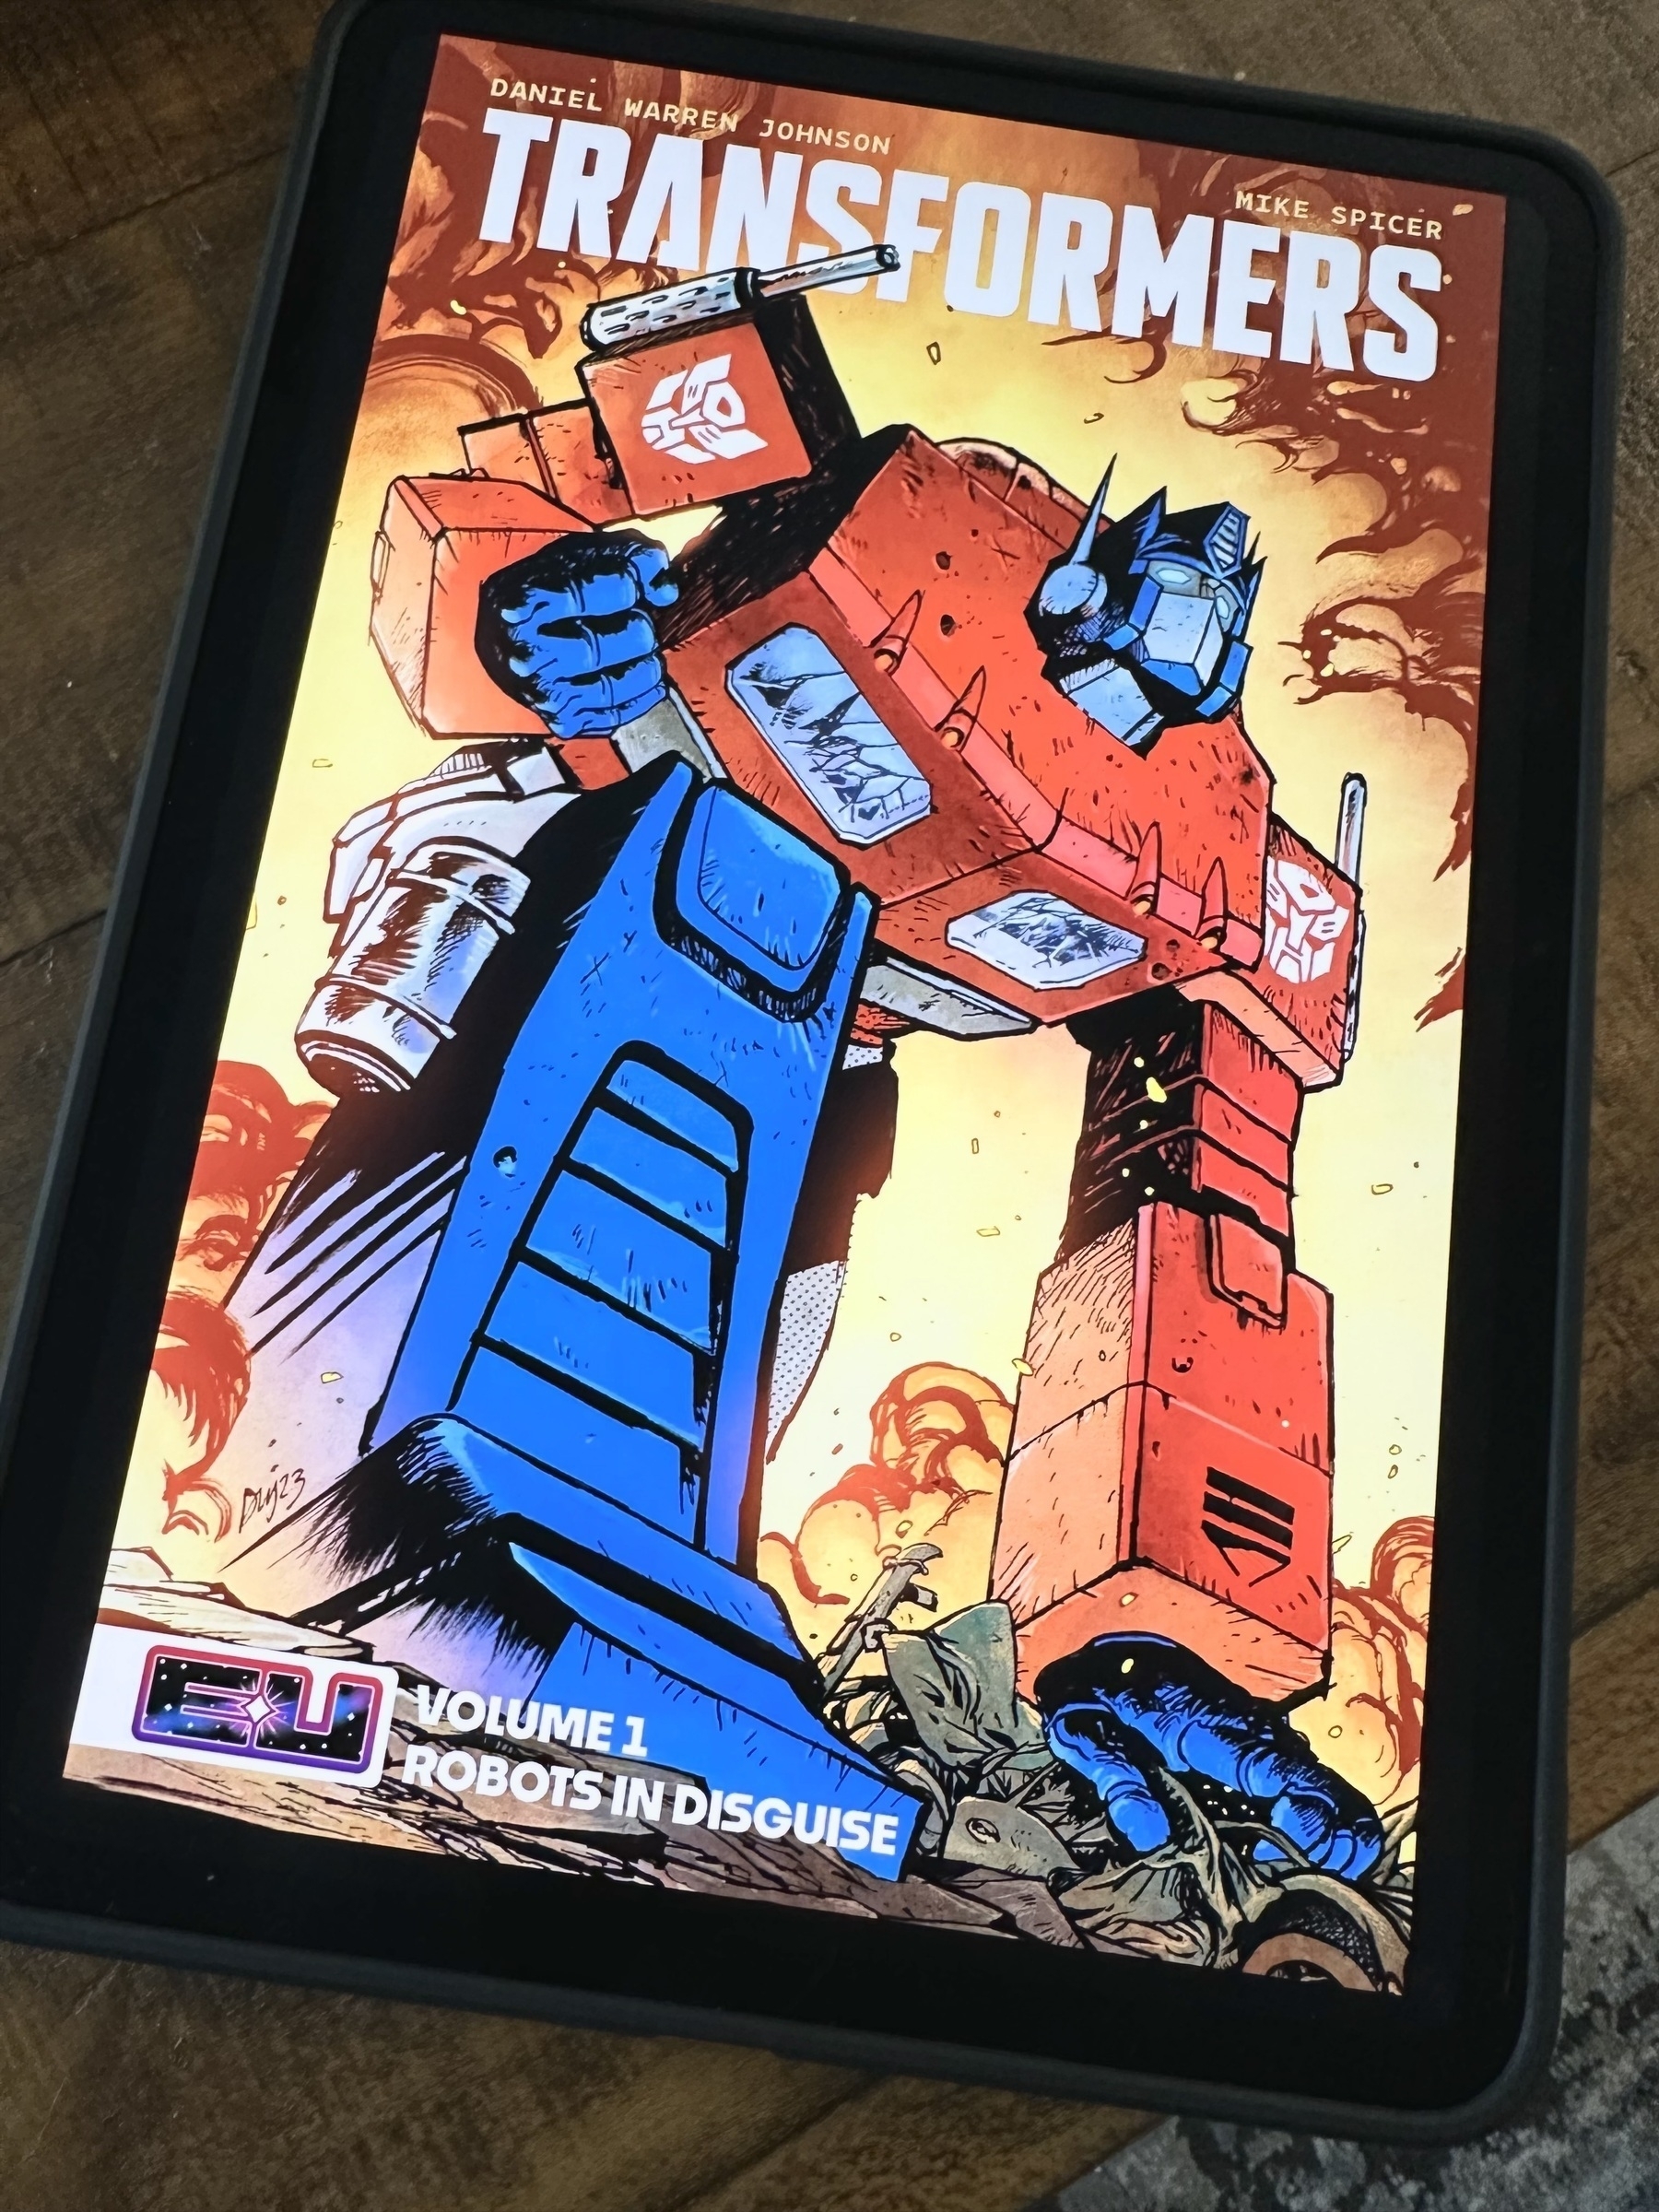 A photo of Transformers (2023-) Vol. 1 on an iPad.